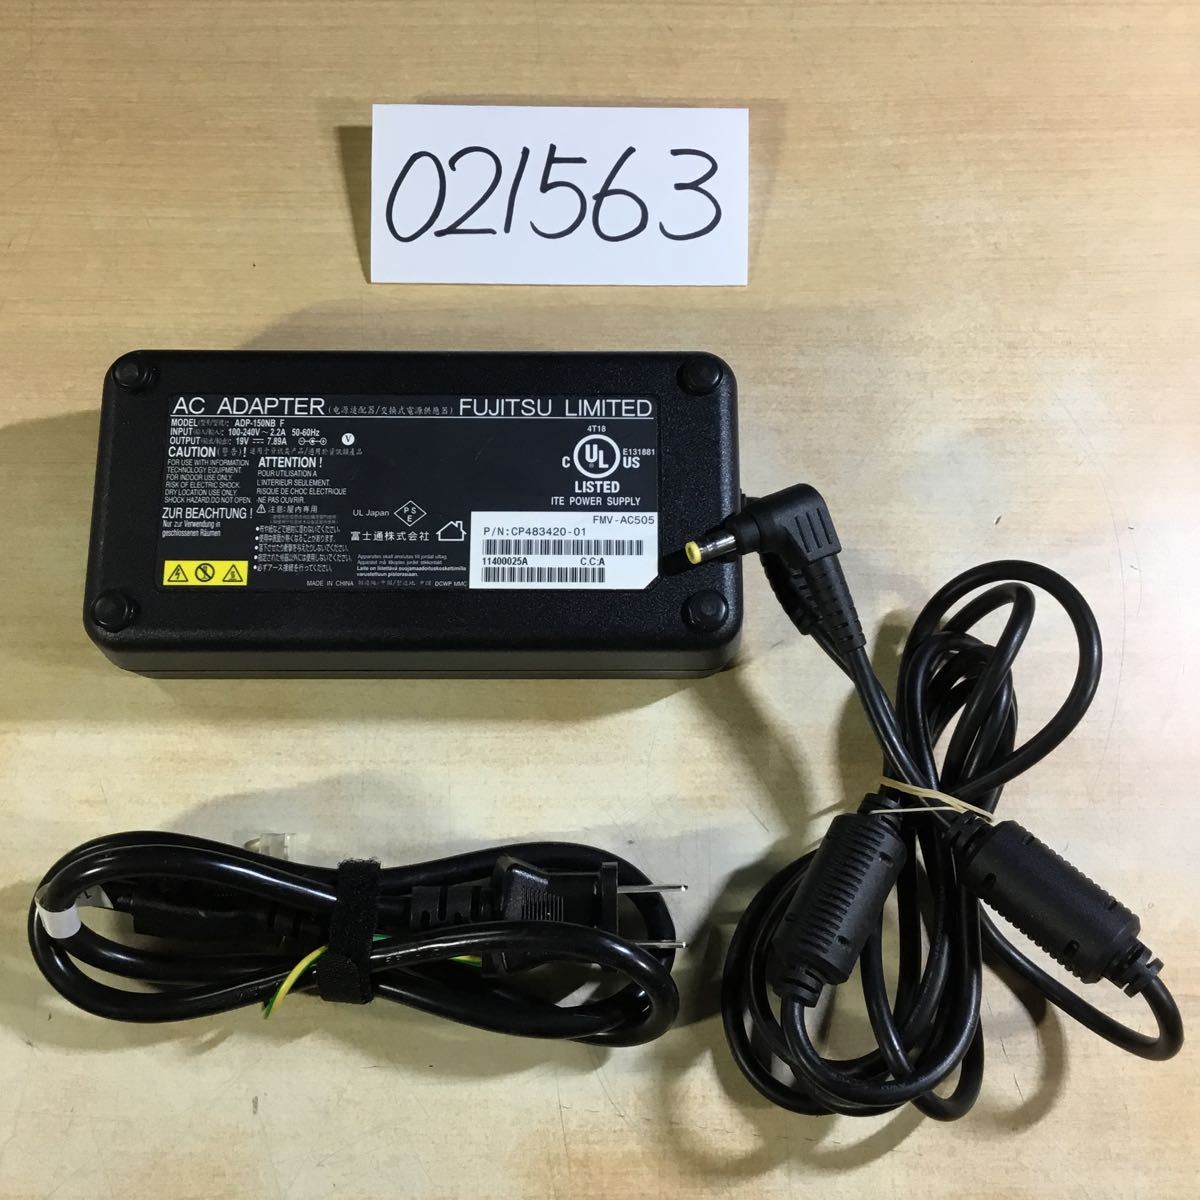 [ free shipping ](021563C) FUJITSU FMV-AC505 19V7.89A genuine products AC adapter Mickey cable attaching secondhand goods 